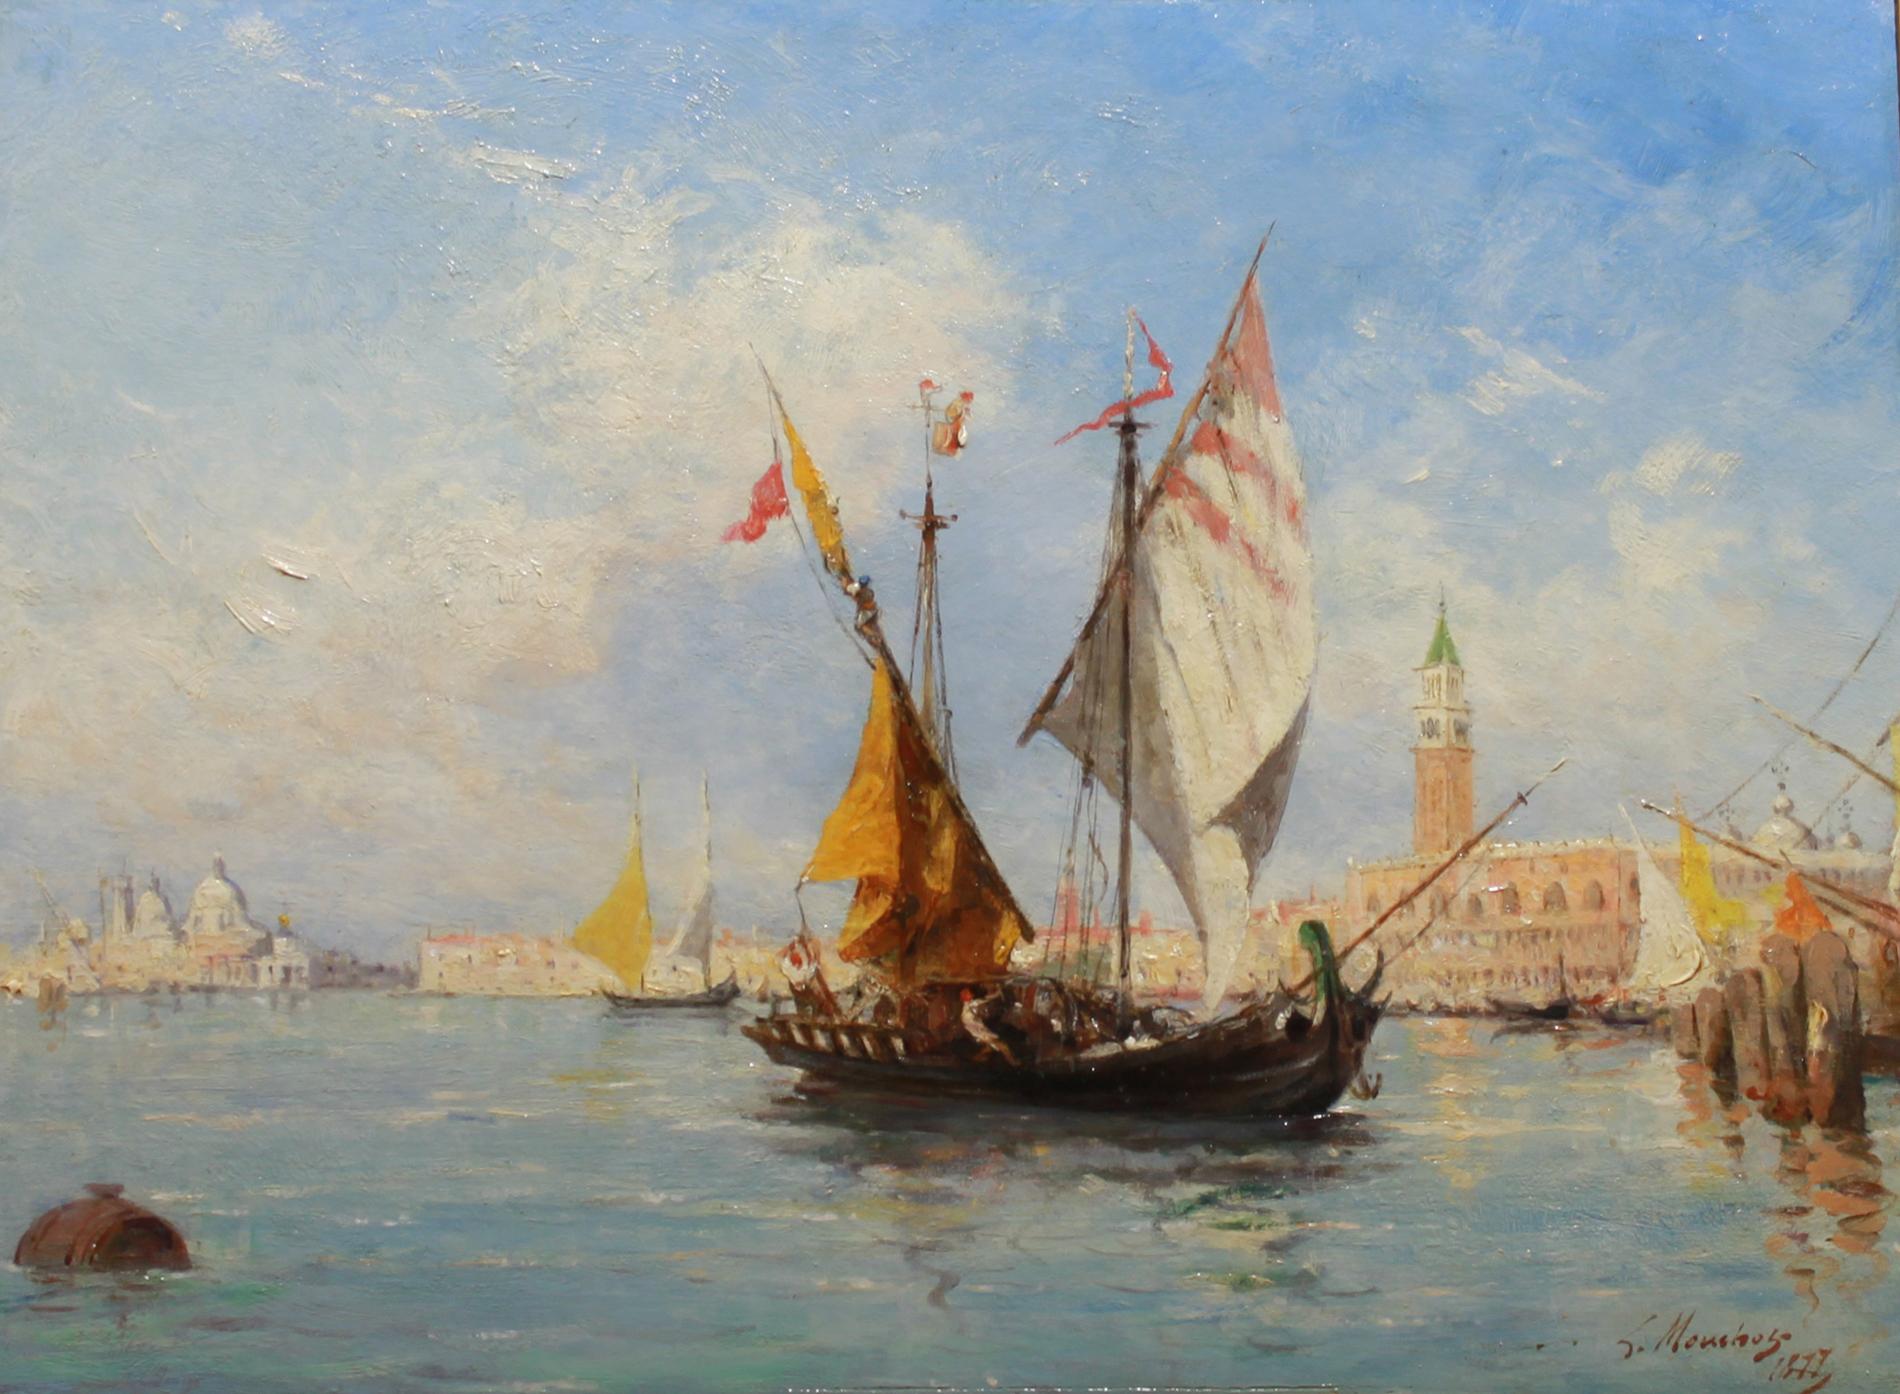 Sailing ships in front of Venice - Painting by Mouchot, Louis Claude